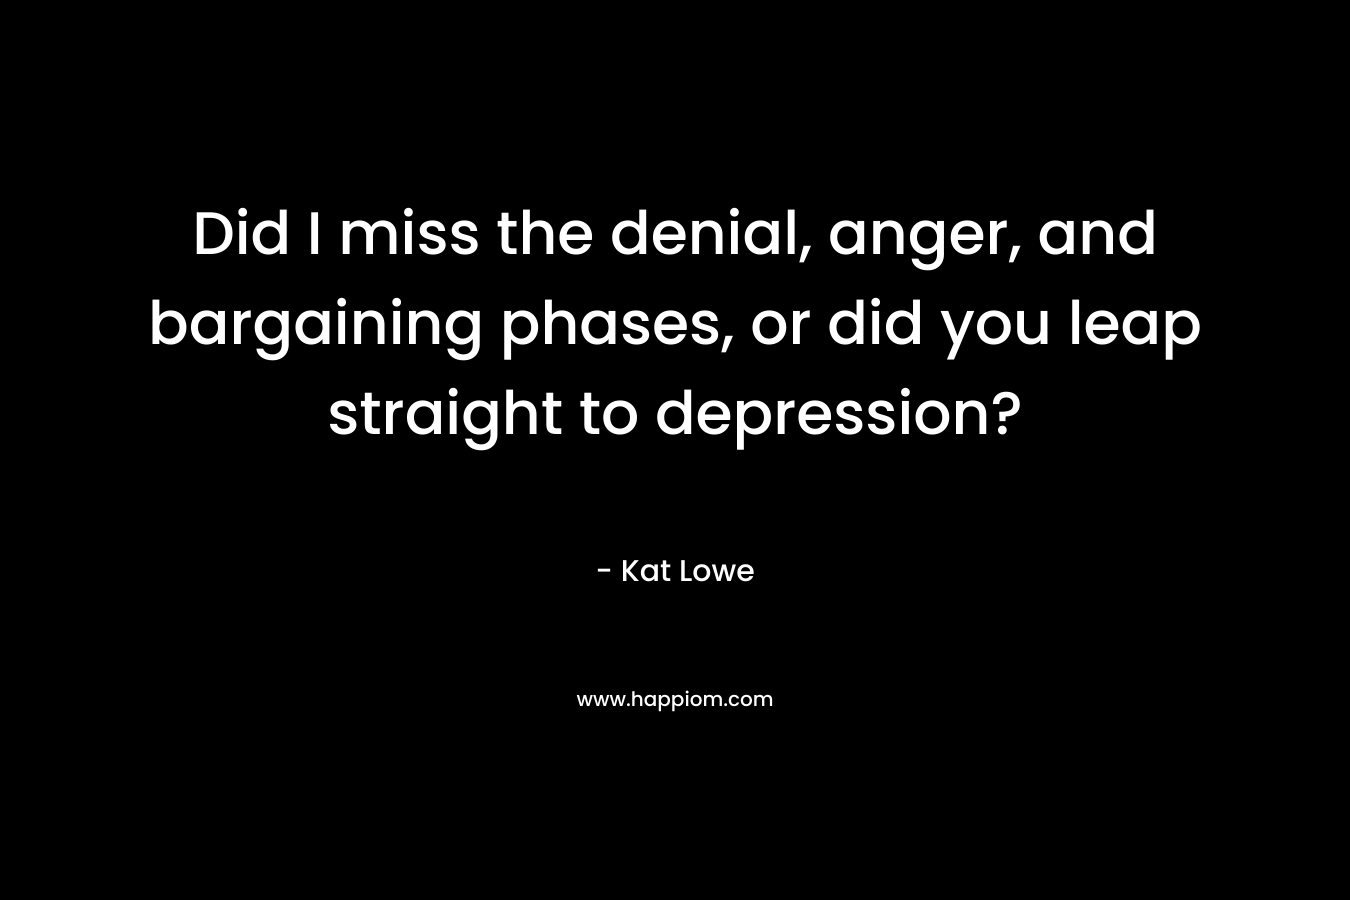 Did I miss the denial, anger, and bargaining phases, or did you leap straight to depression?